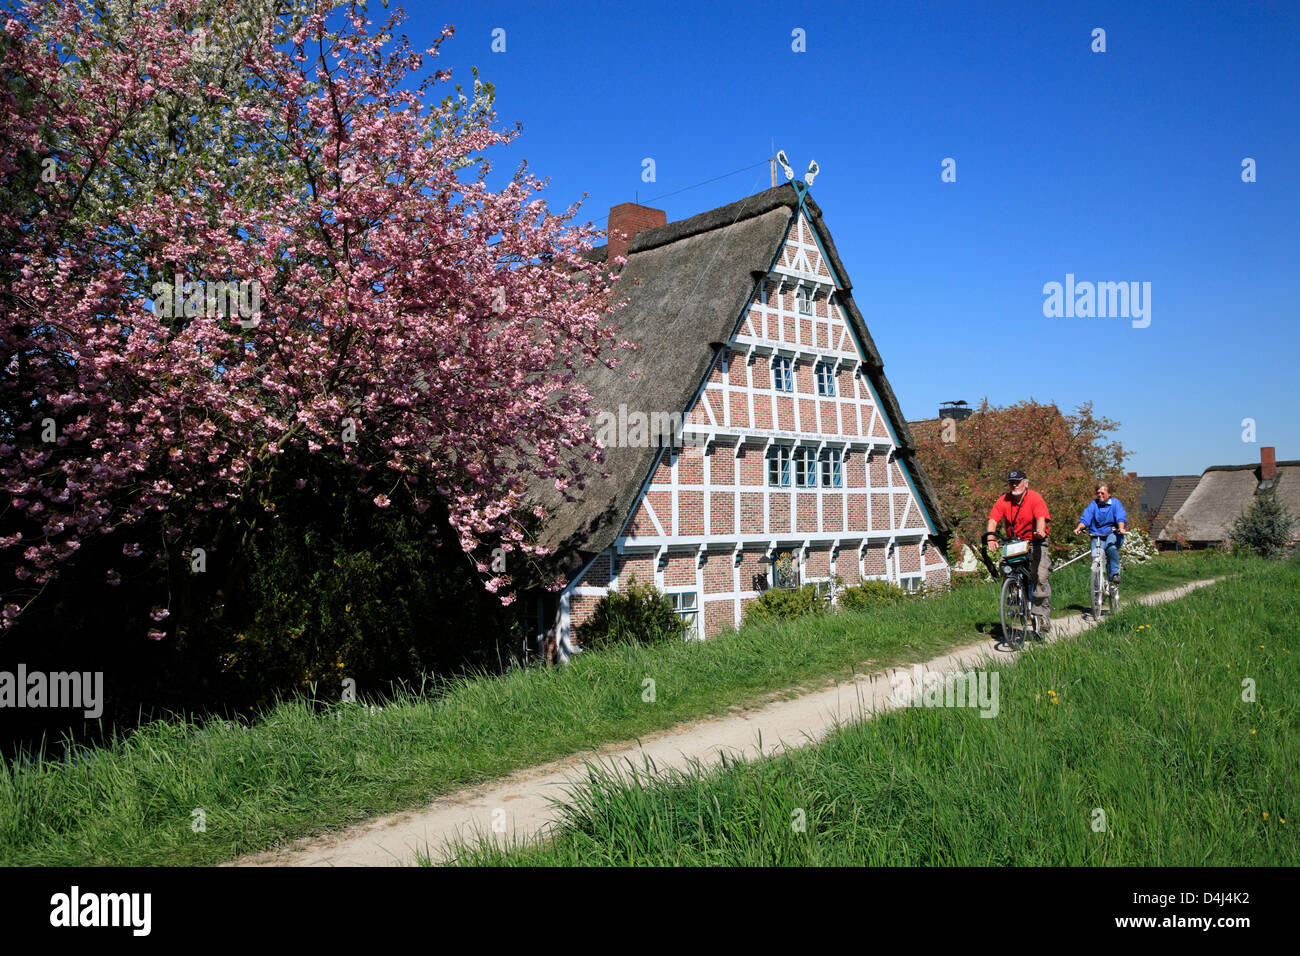 Altes Land, cherry blossom, cyclists on Este dike, Lower saxony, Stock Photo